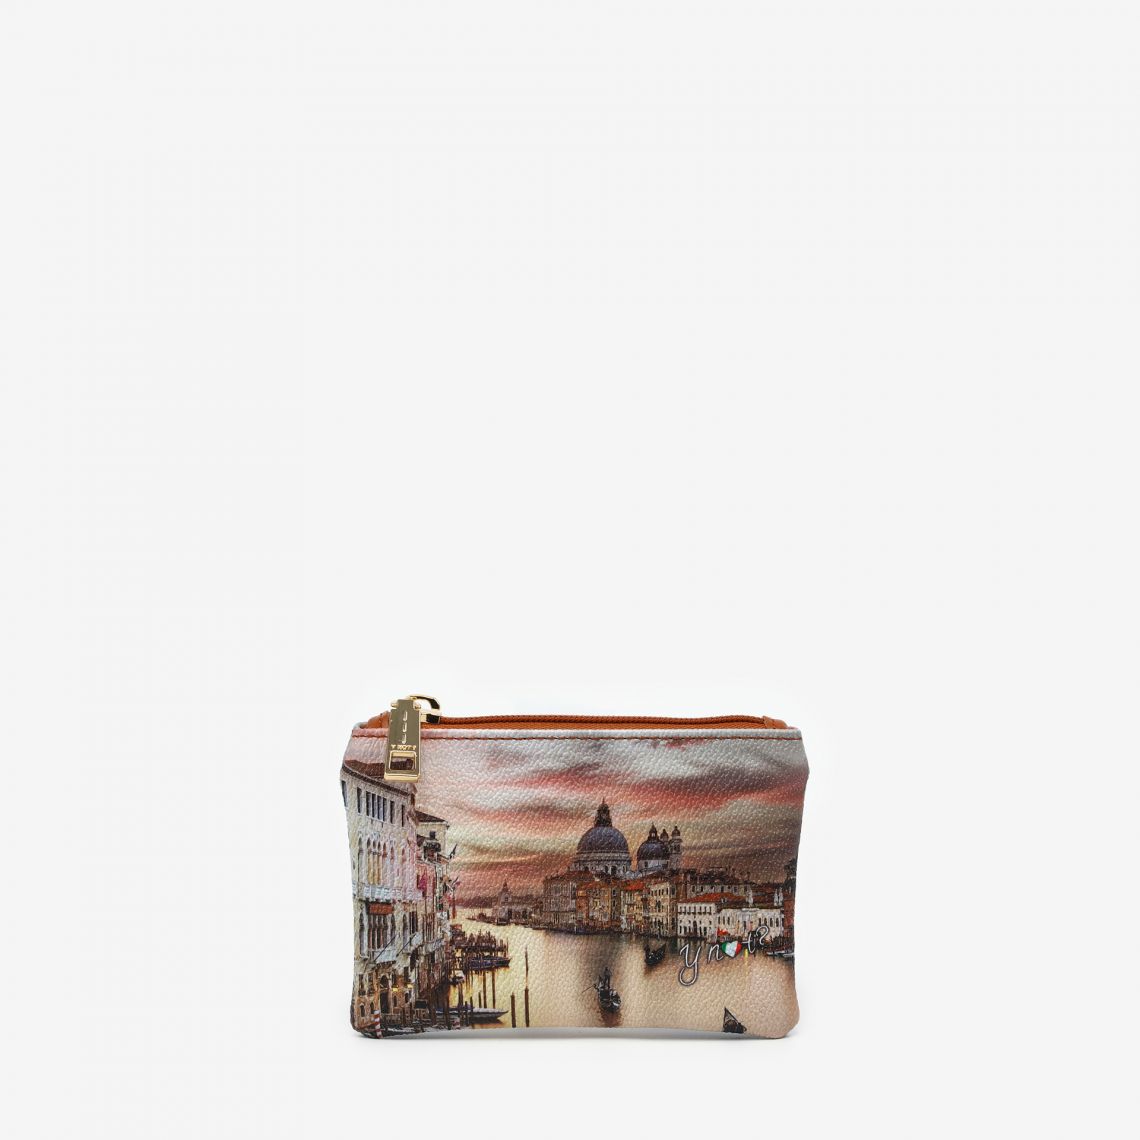 Al 70 Outlet Pocket Small Canal Grande borse bag in offerta